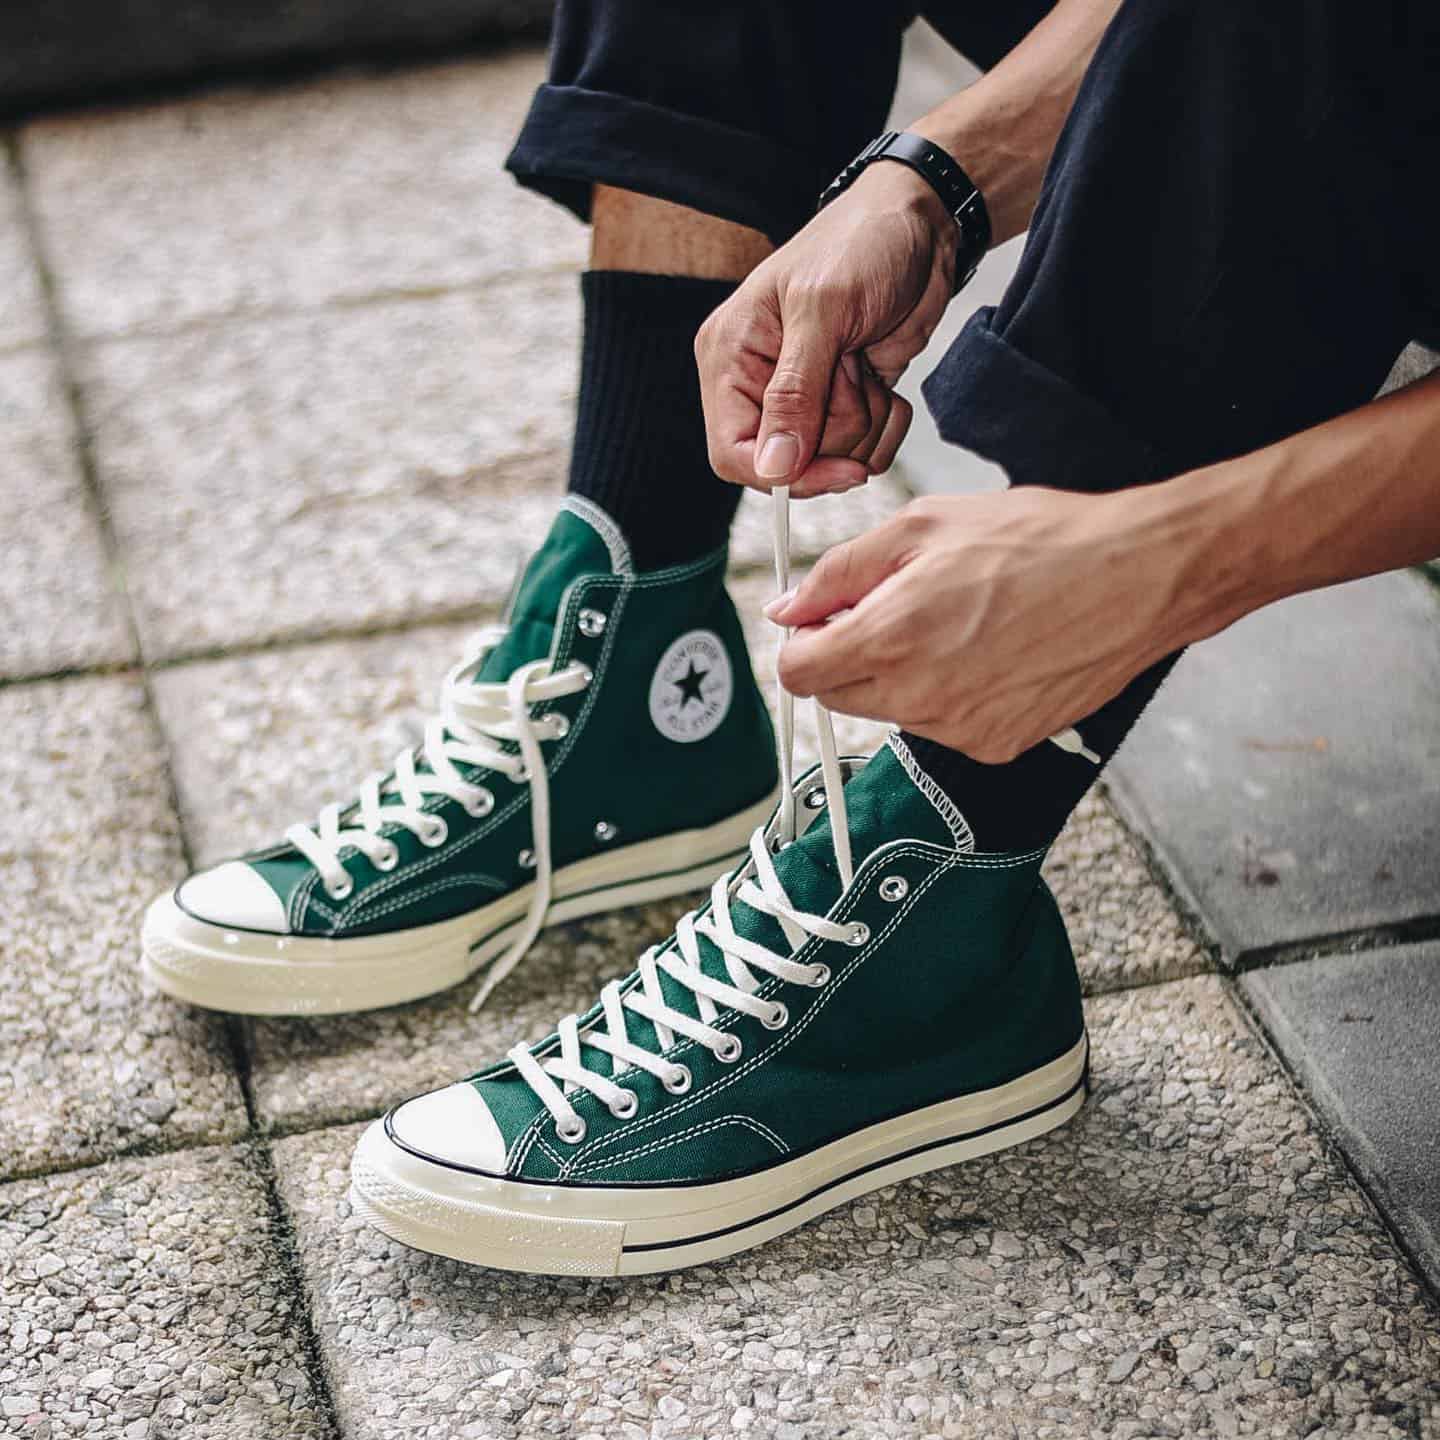 tying the shoelace of a classic chuck 70 by converse